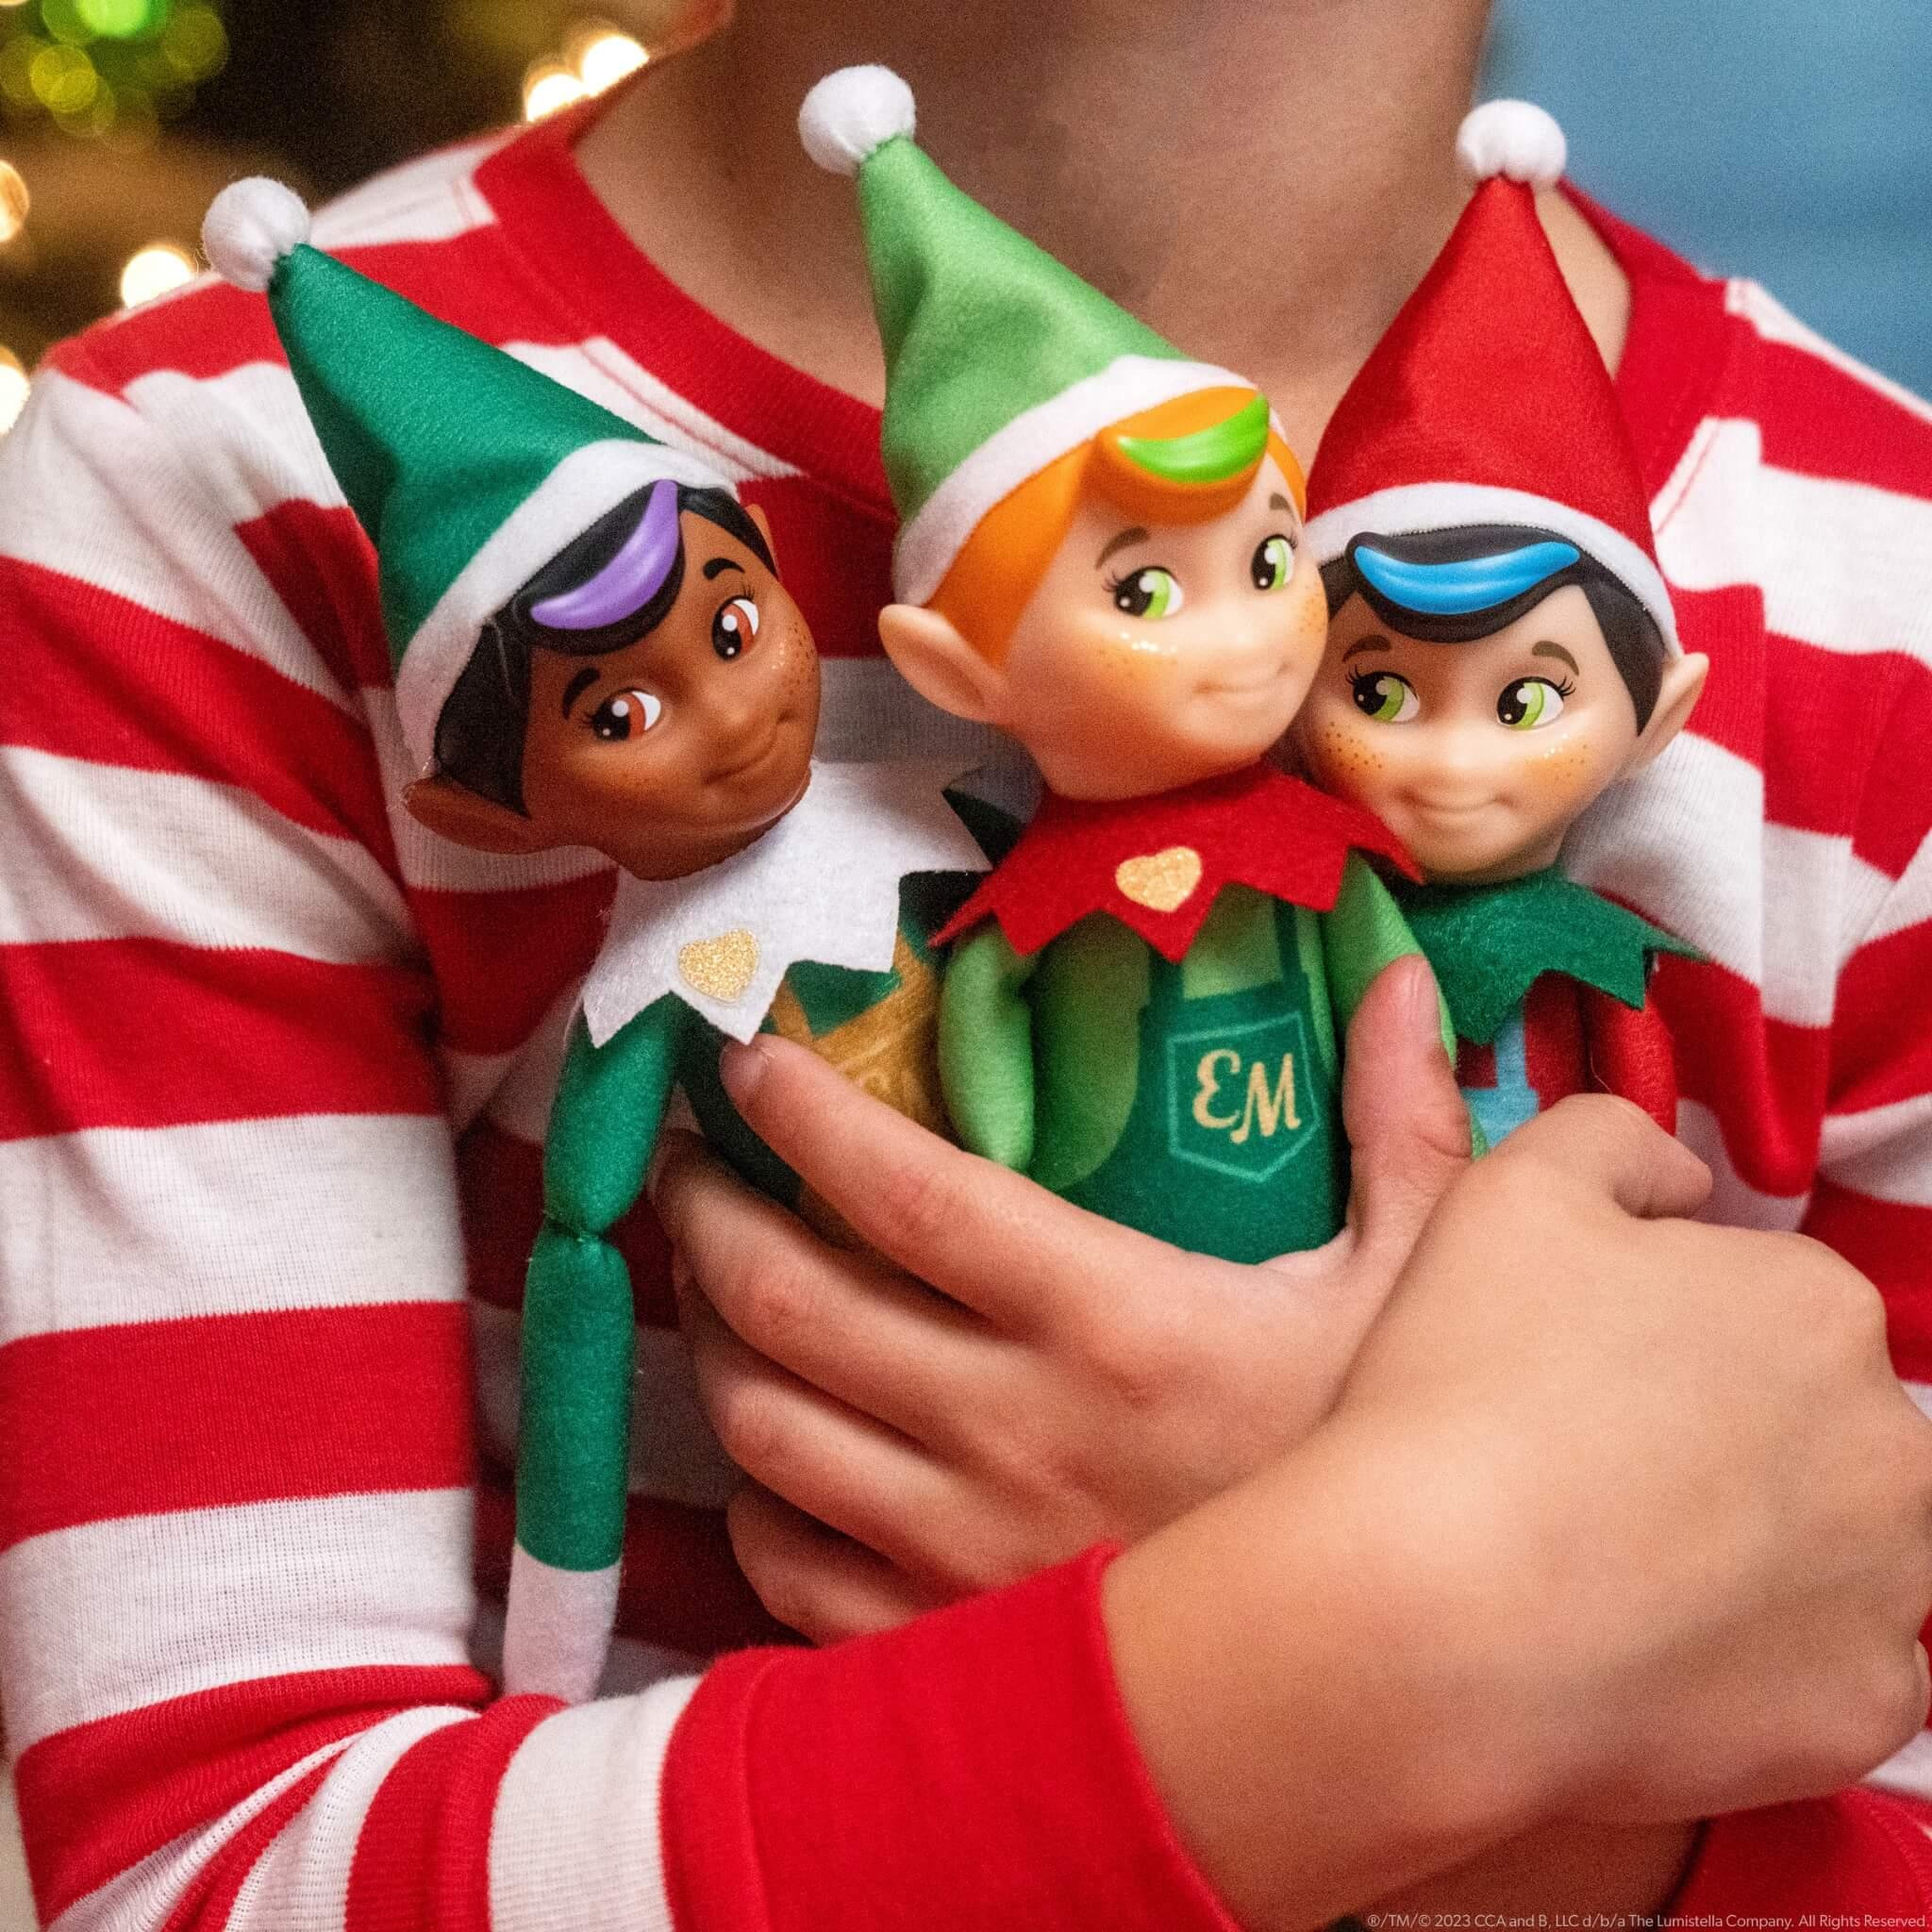 The Elf On The Shelf®: The Ultimate Christmas Collection DVD - The Elf on The  Shelf